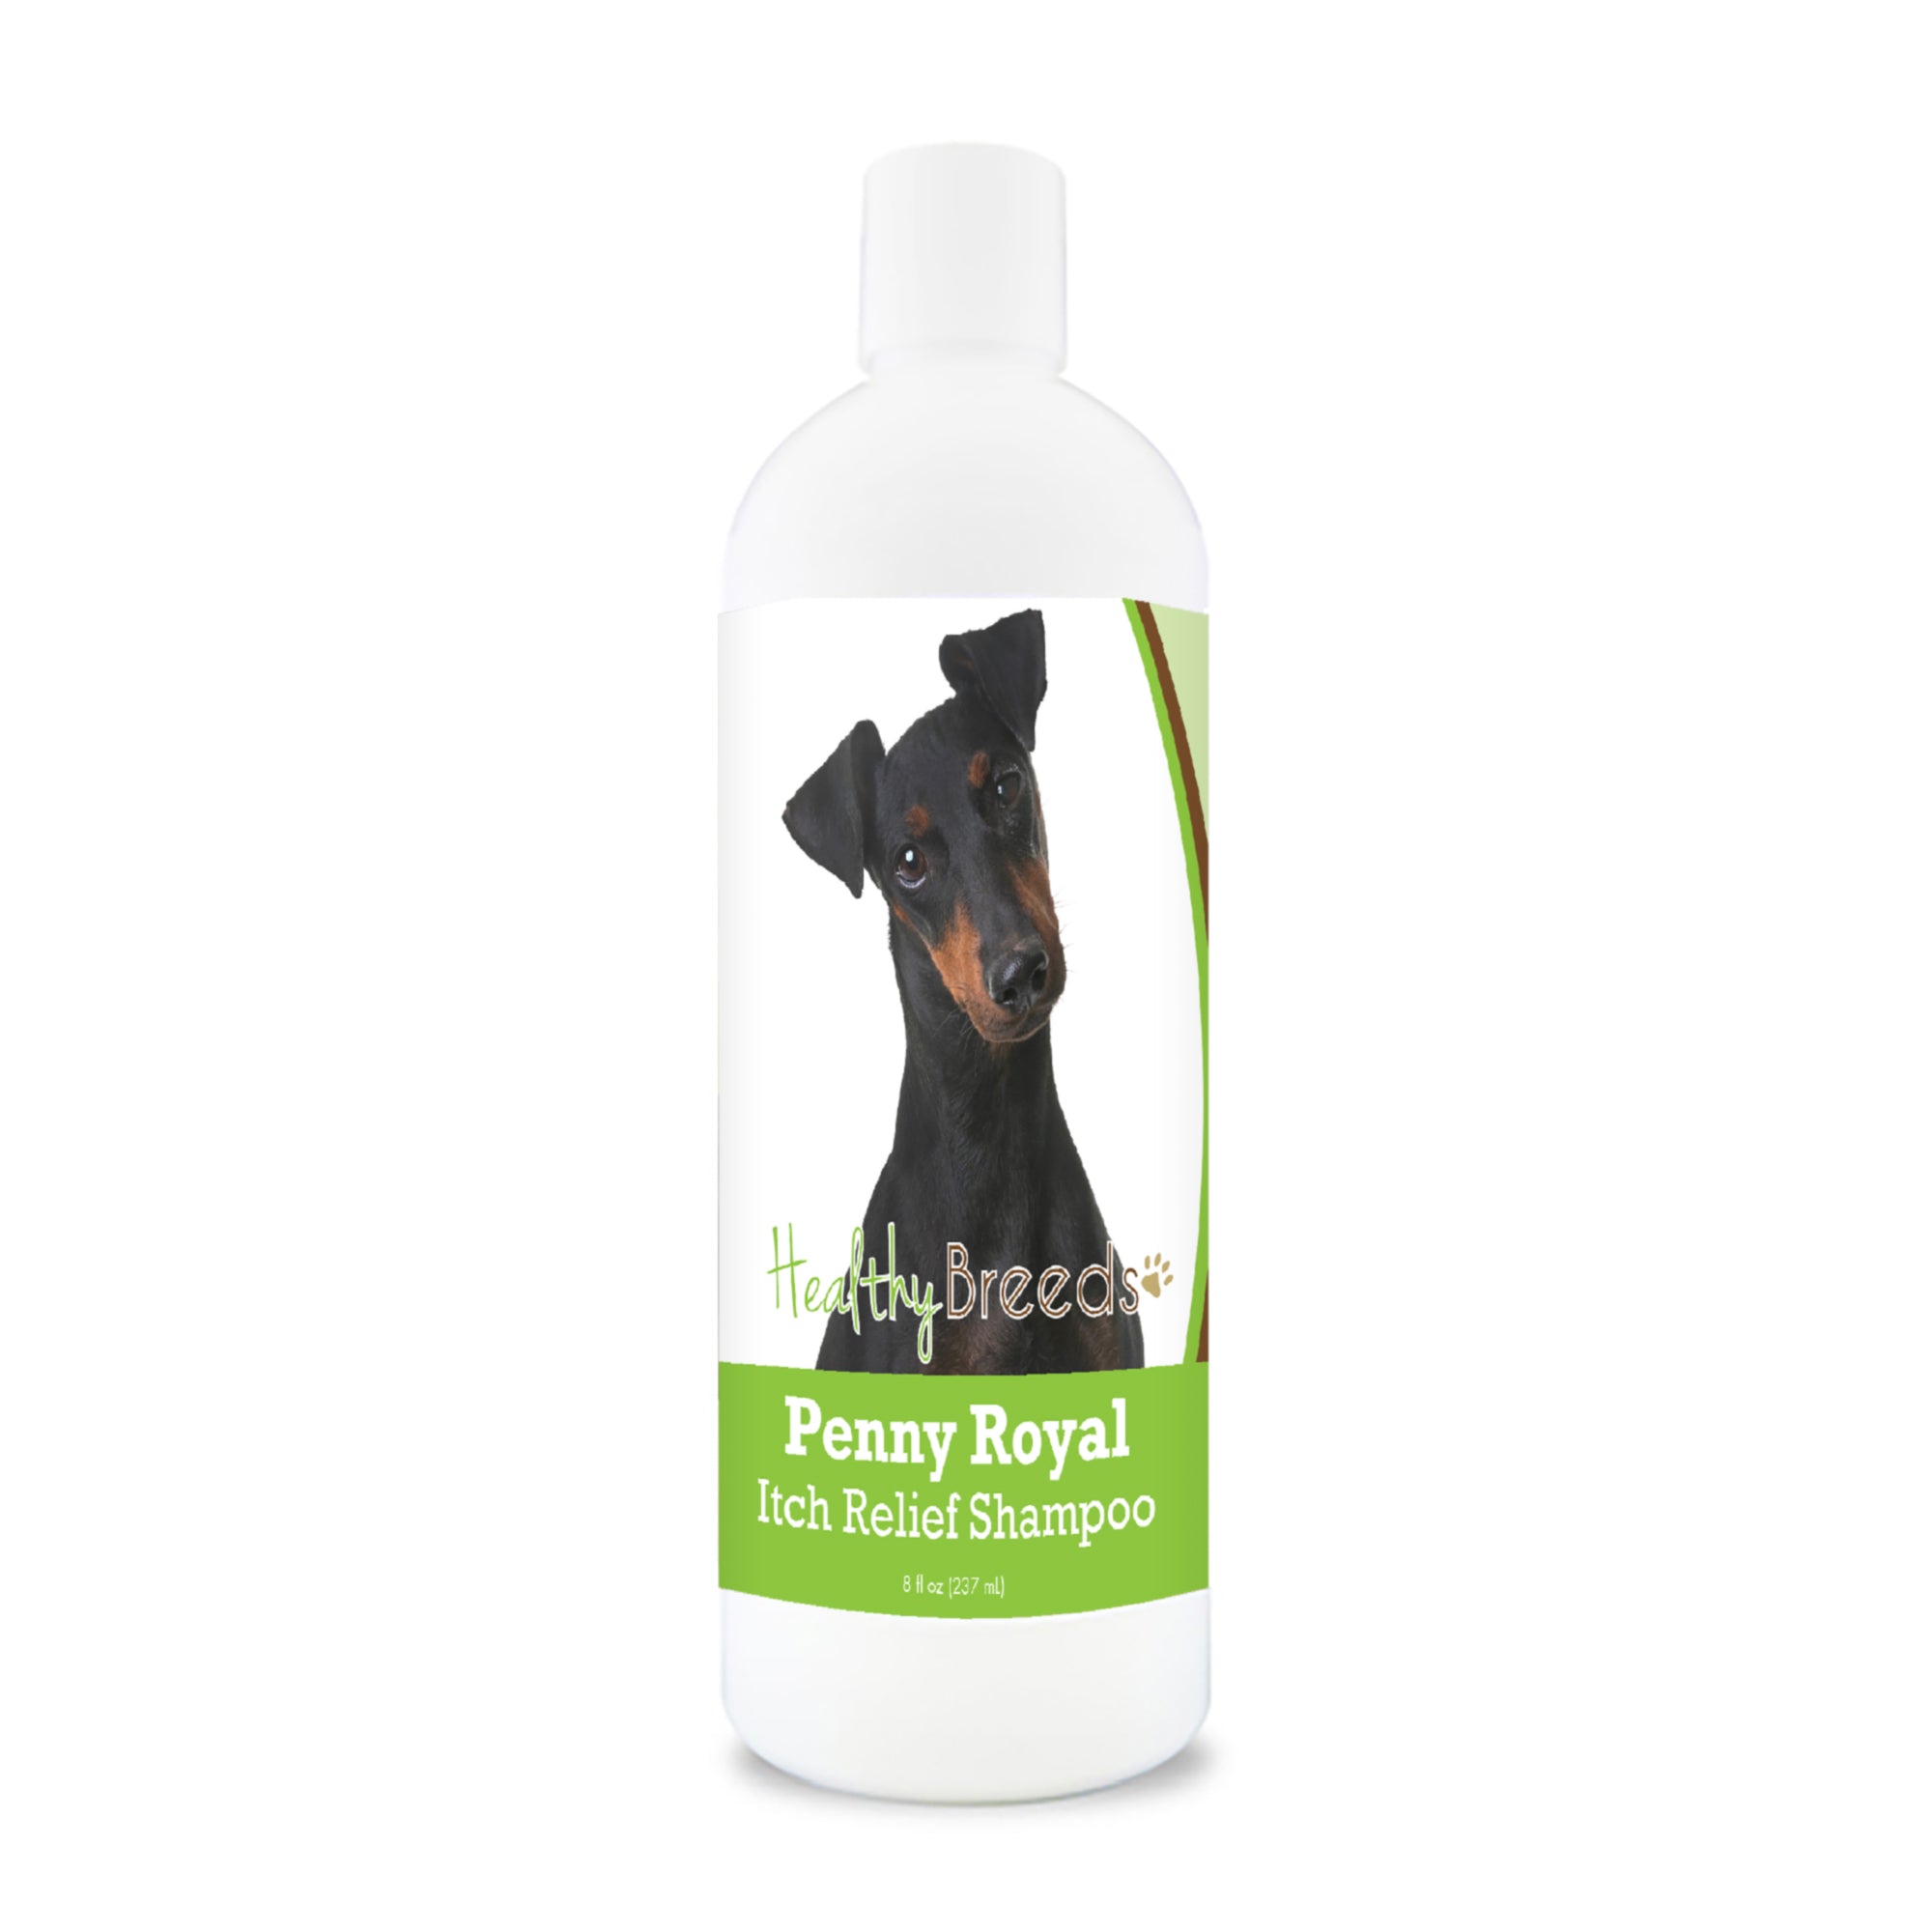 Manchester Terrier Penny Royal Itch Relief Shampoo 8 oz